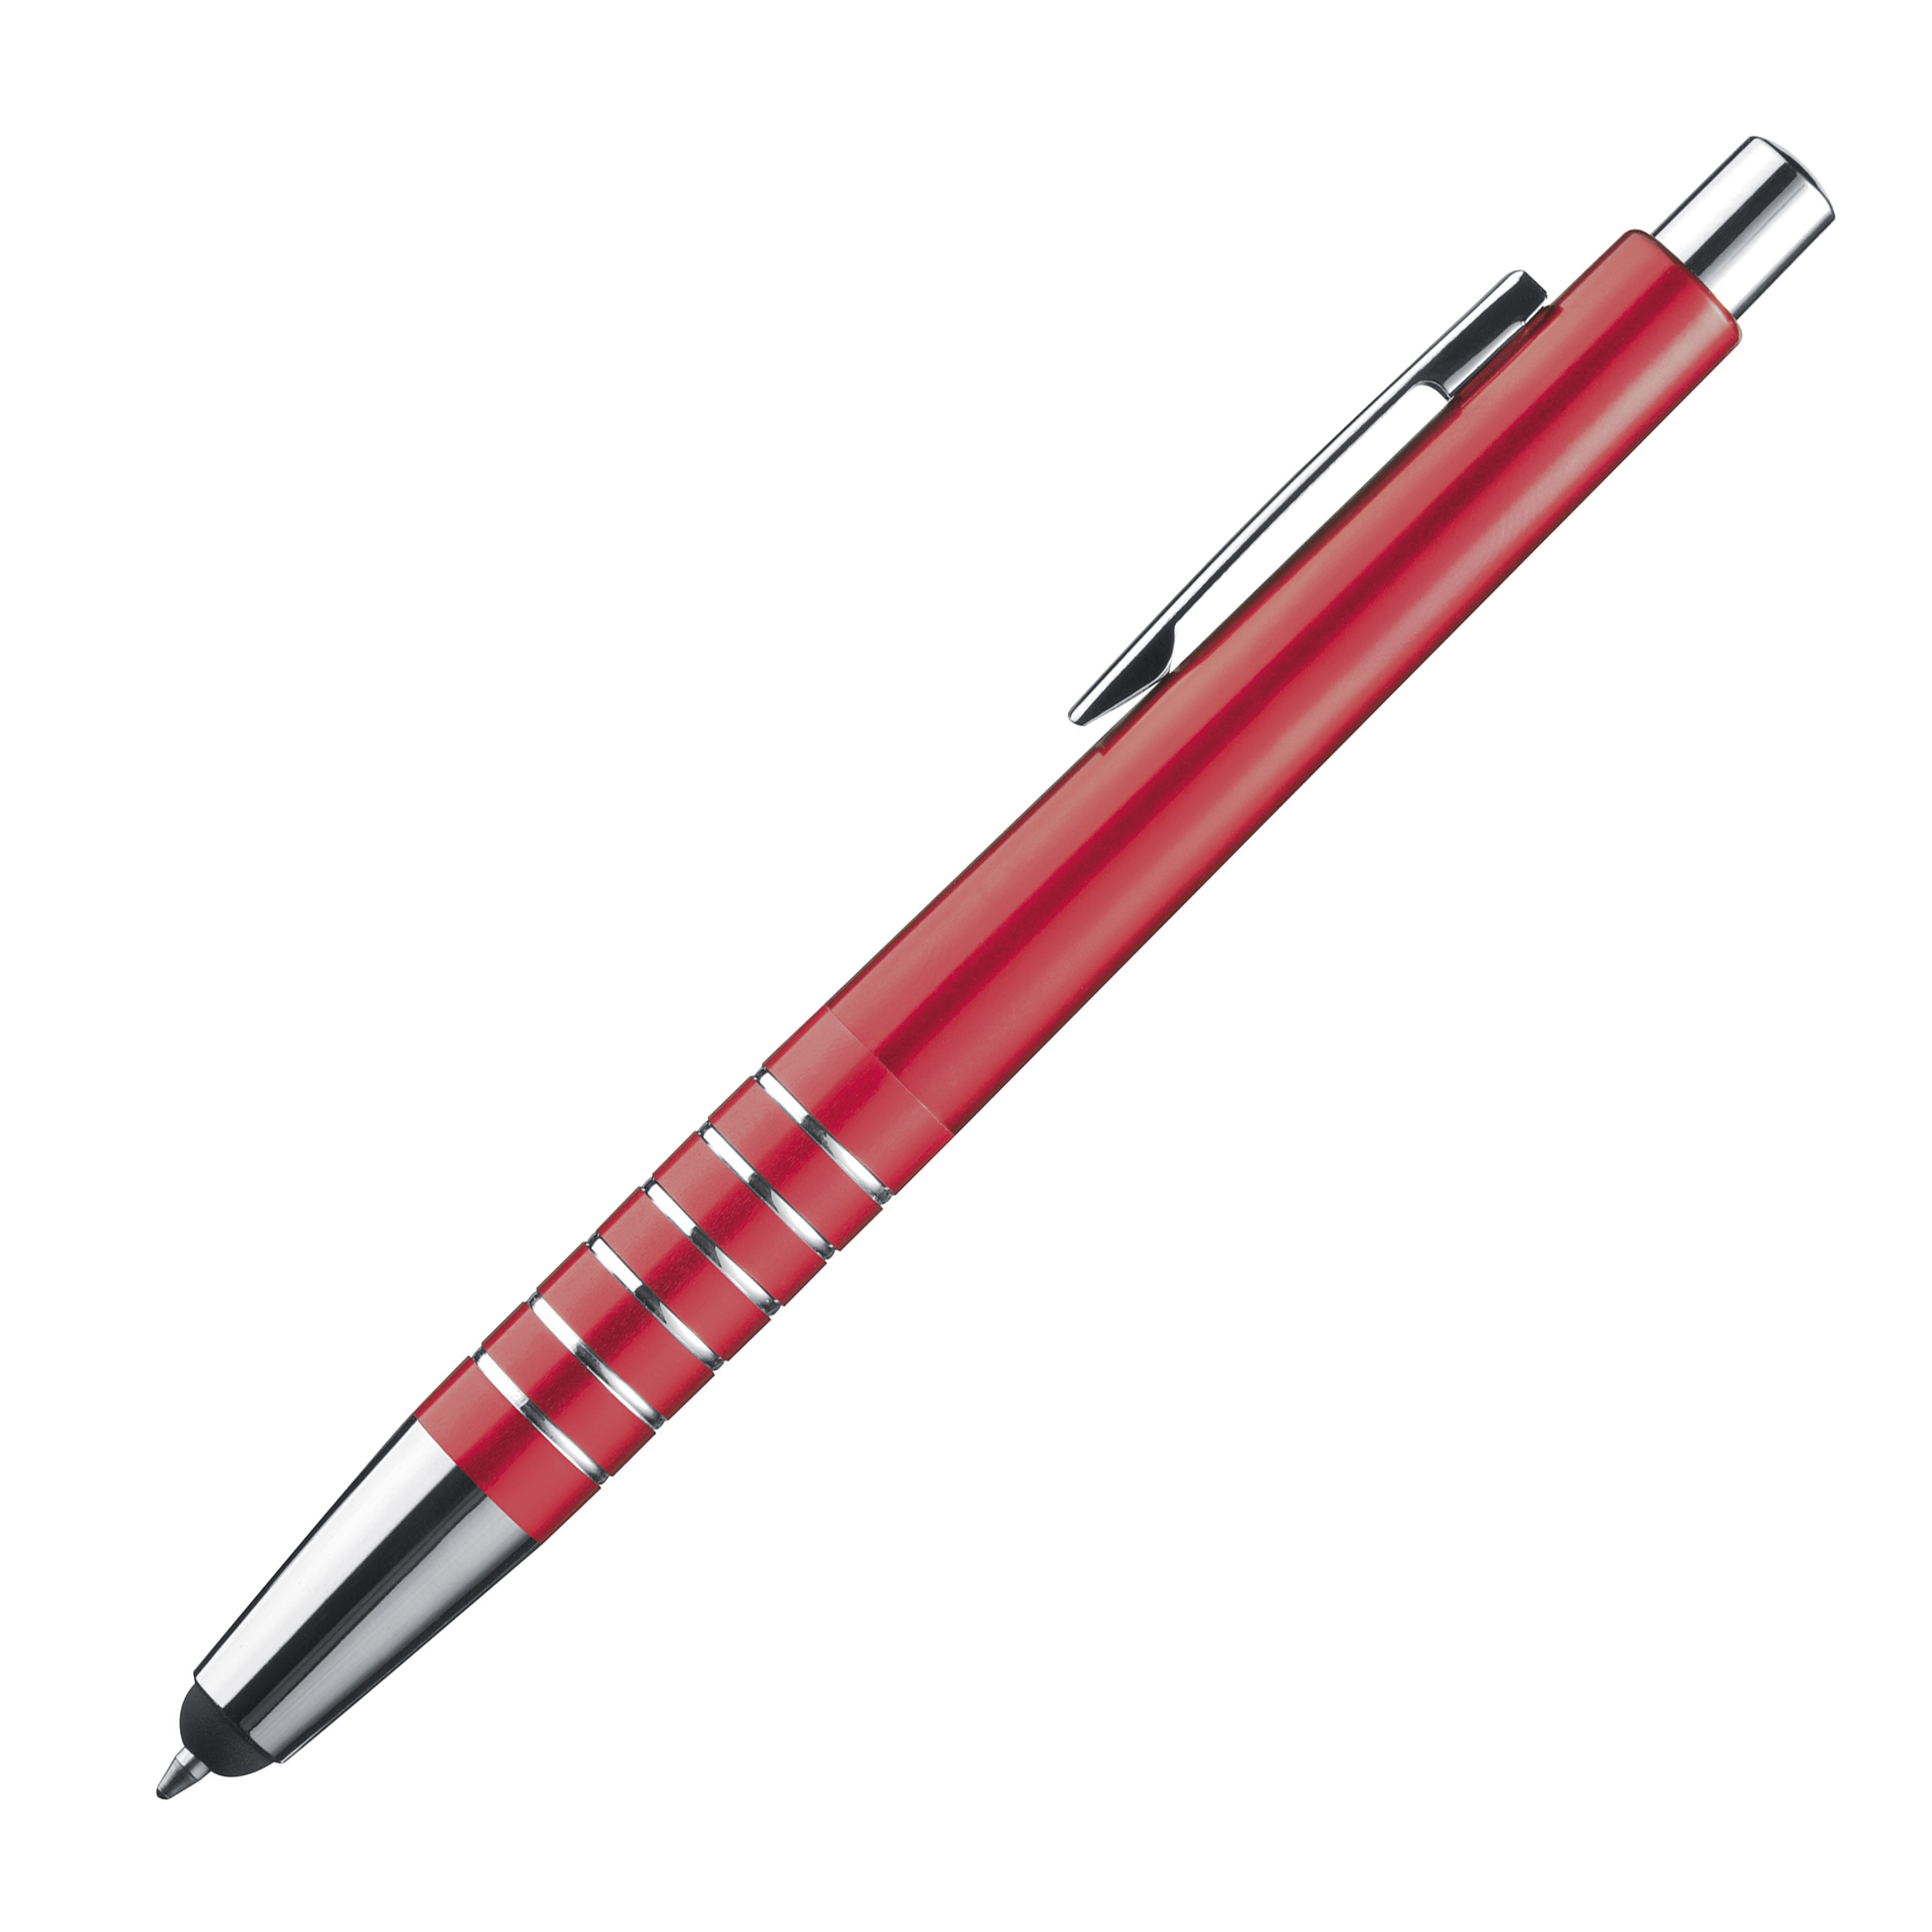 Ball pen with touch pad